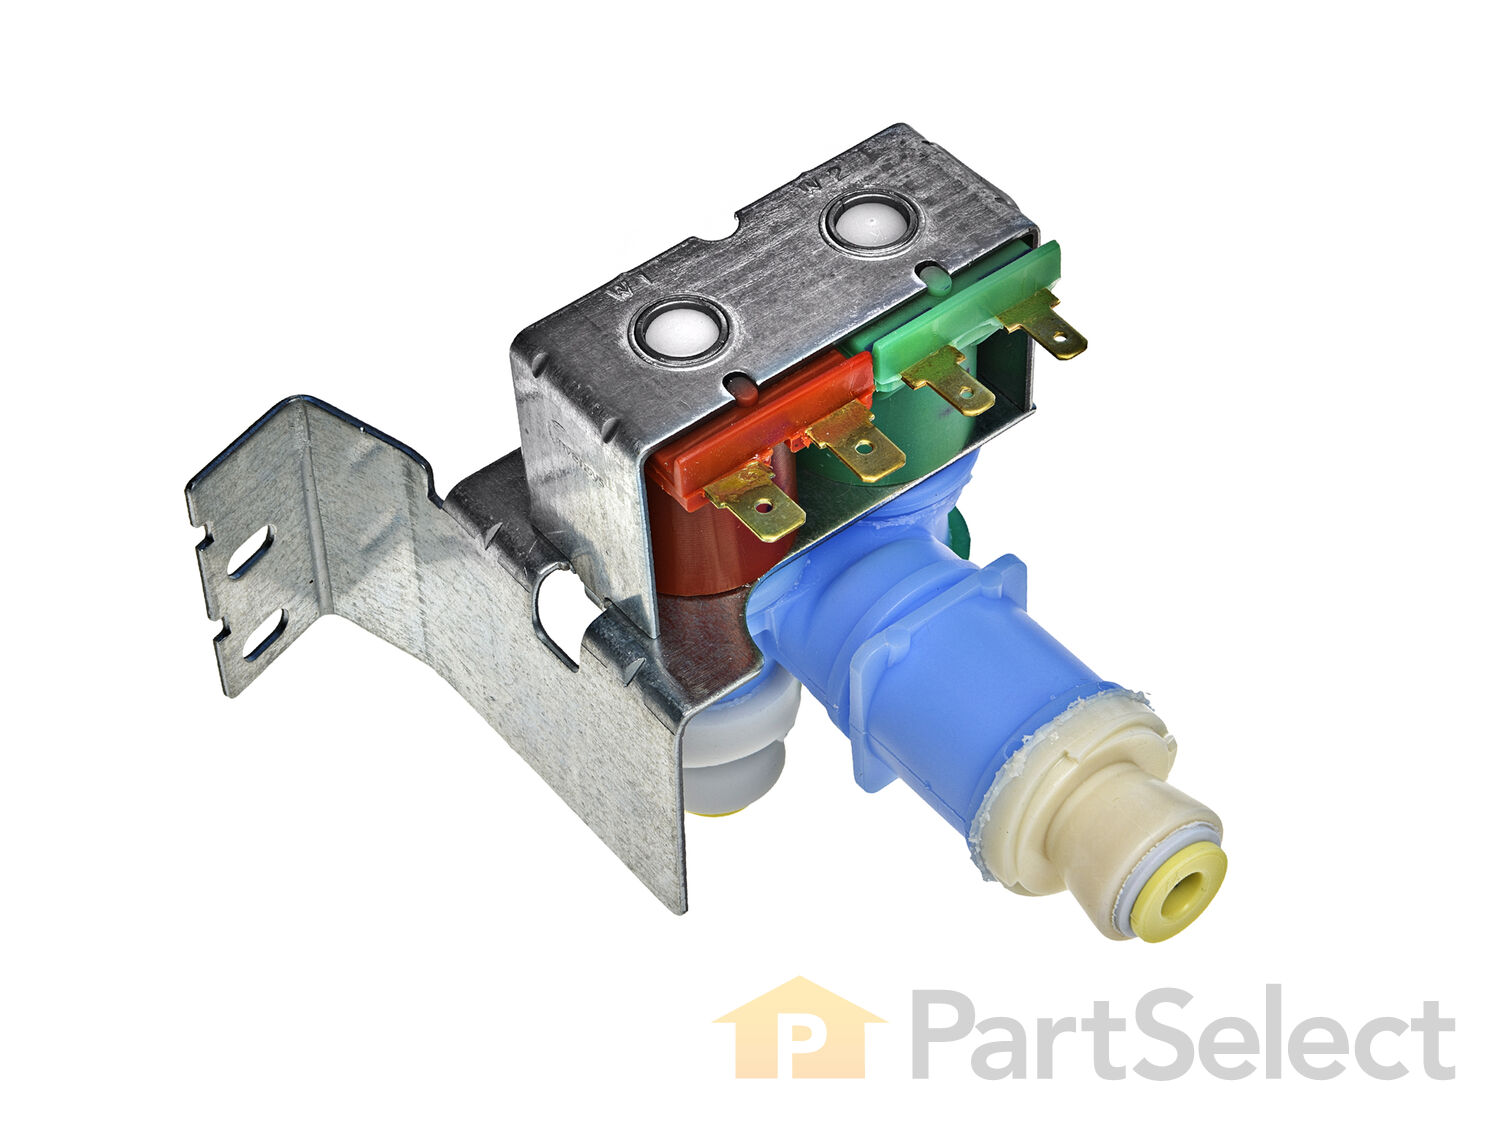 Priority $4.95 Whirlpool Valve W10408179 fits 4389177 2188622 2315534 PS3497634 